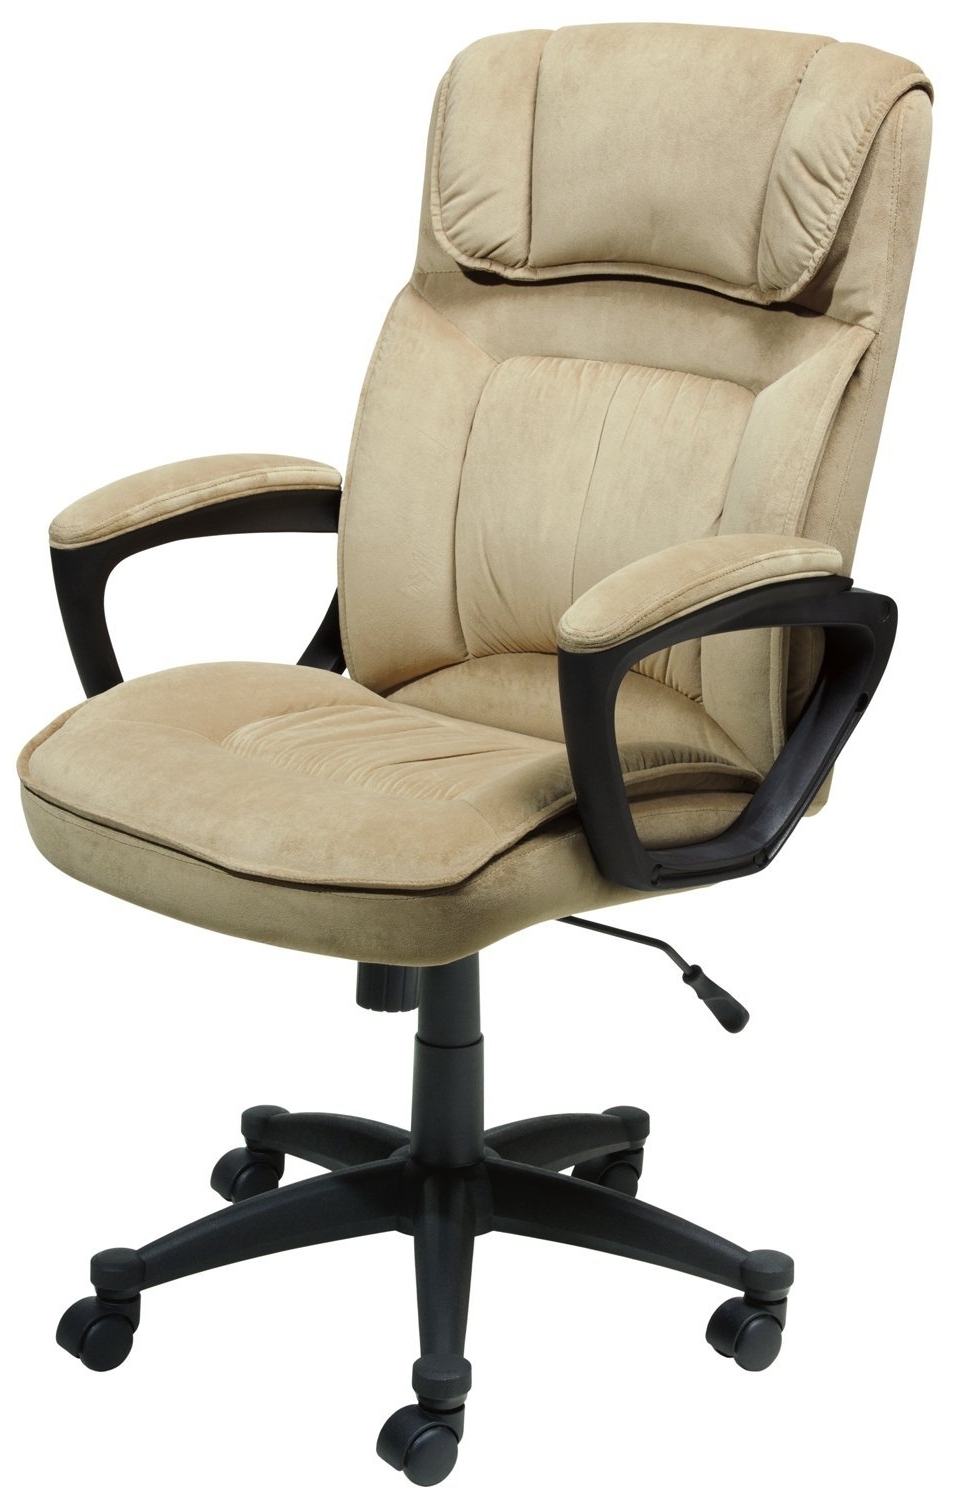 Plush Executive Office Chairs